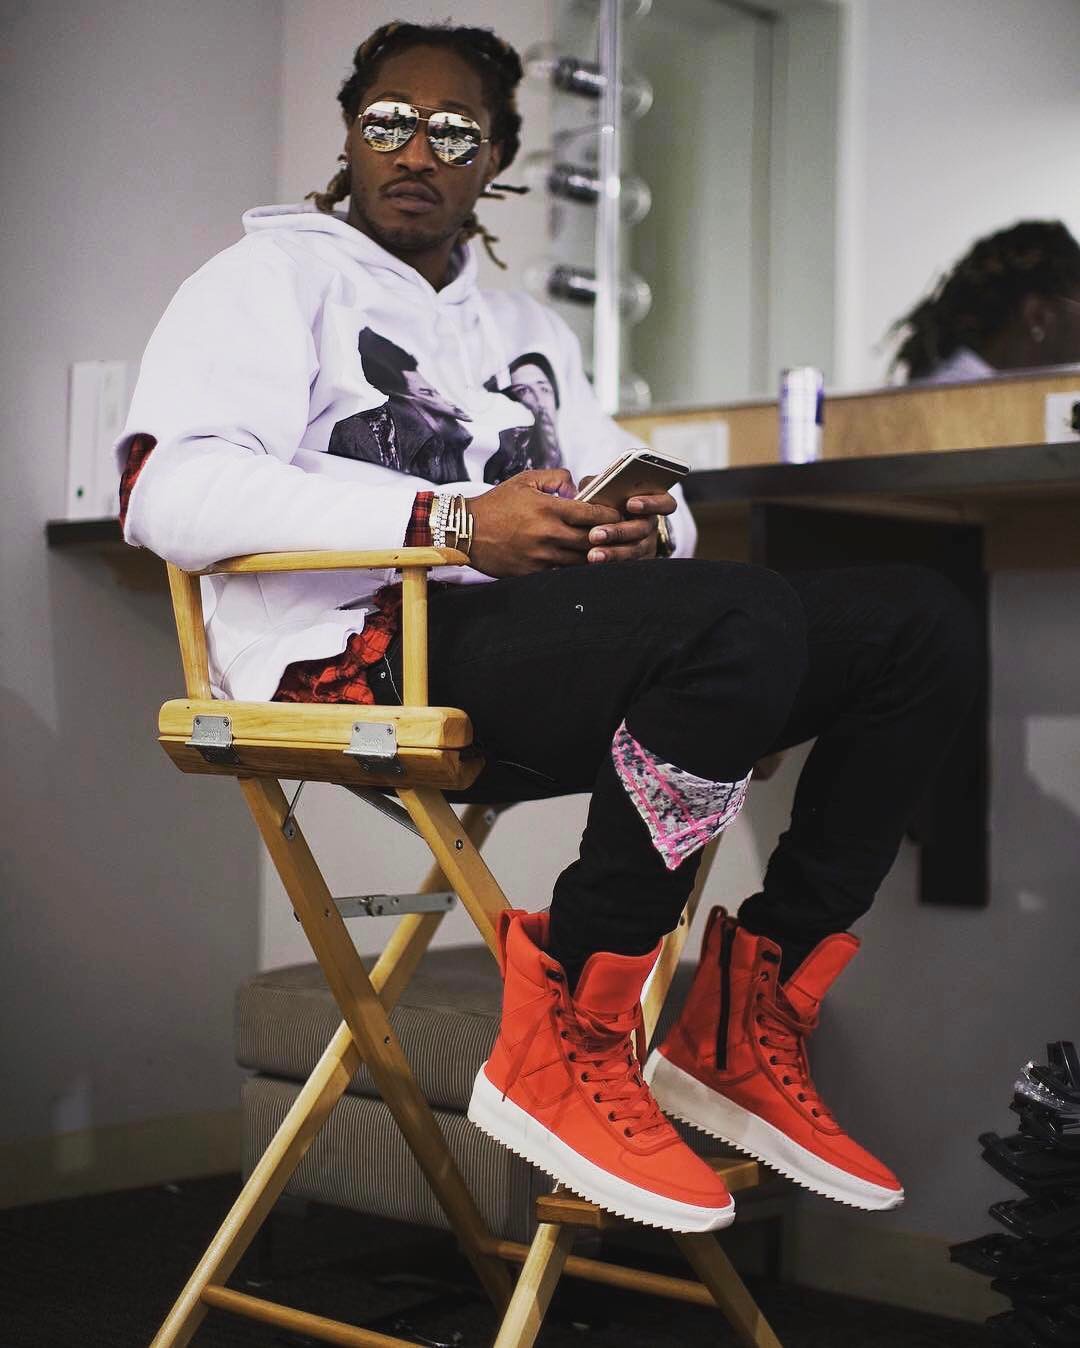 SPOTTED: Future In Ih Nom Uh Nit x HNDRXX Hoodie And 1 of 1 Fear Of God Infrared Sneakers